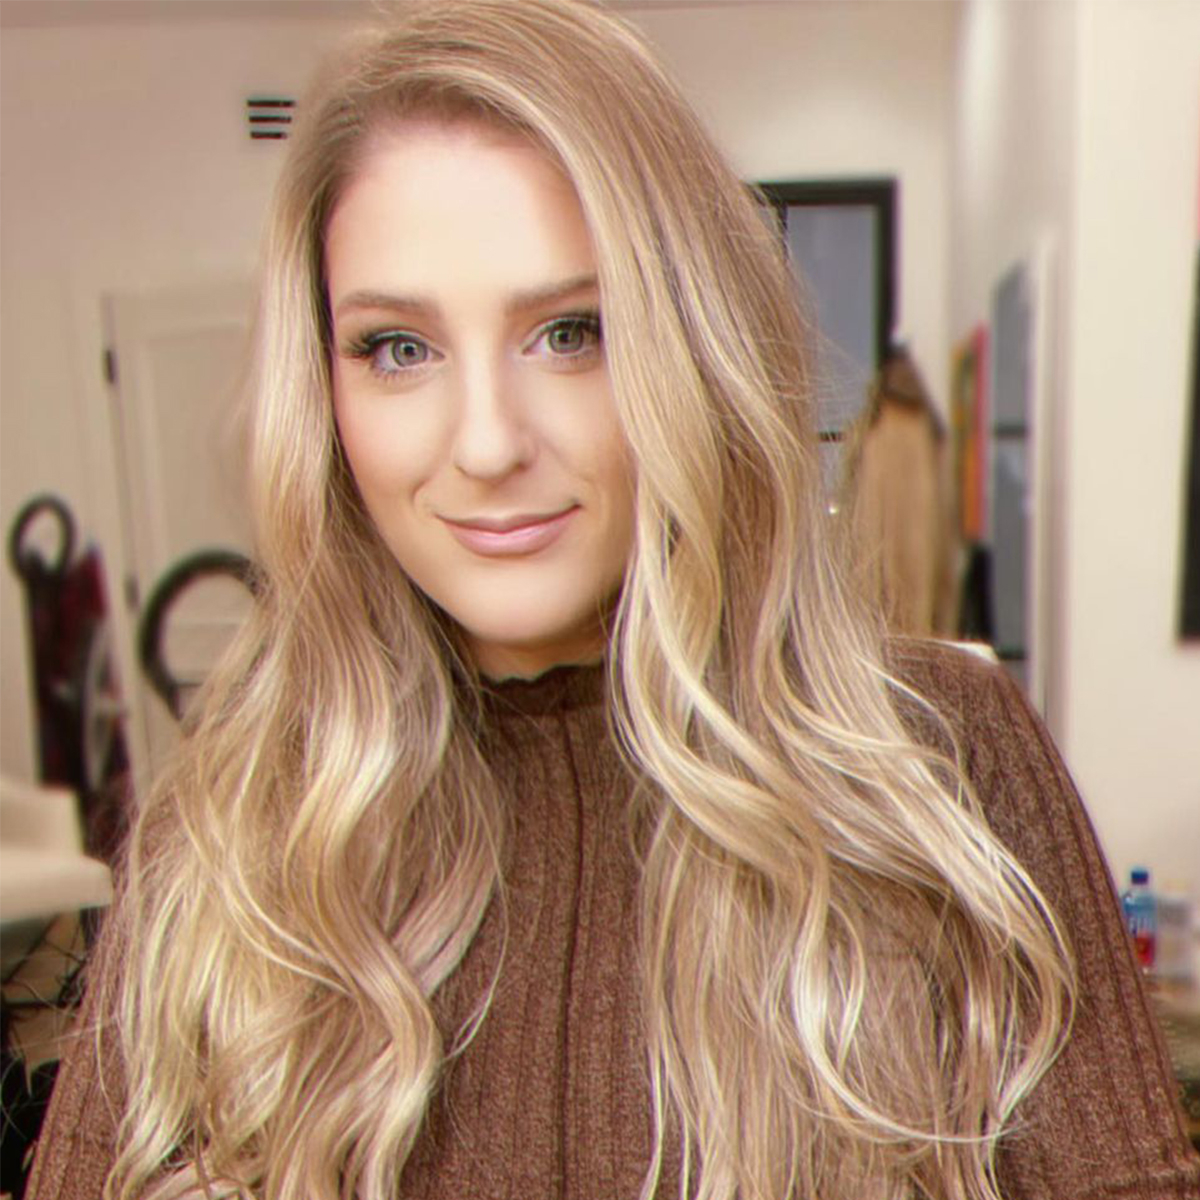 Why Meghan Trainor Worried She Was Experiencing Pregnancy Loss With Baby No. 2 – E! Online